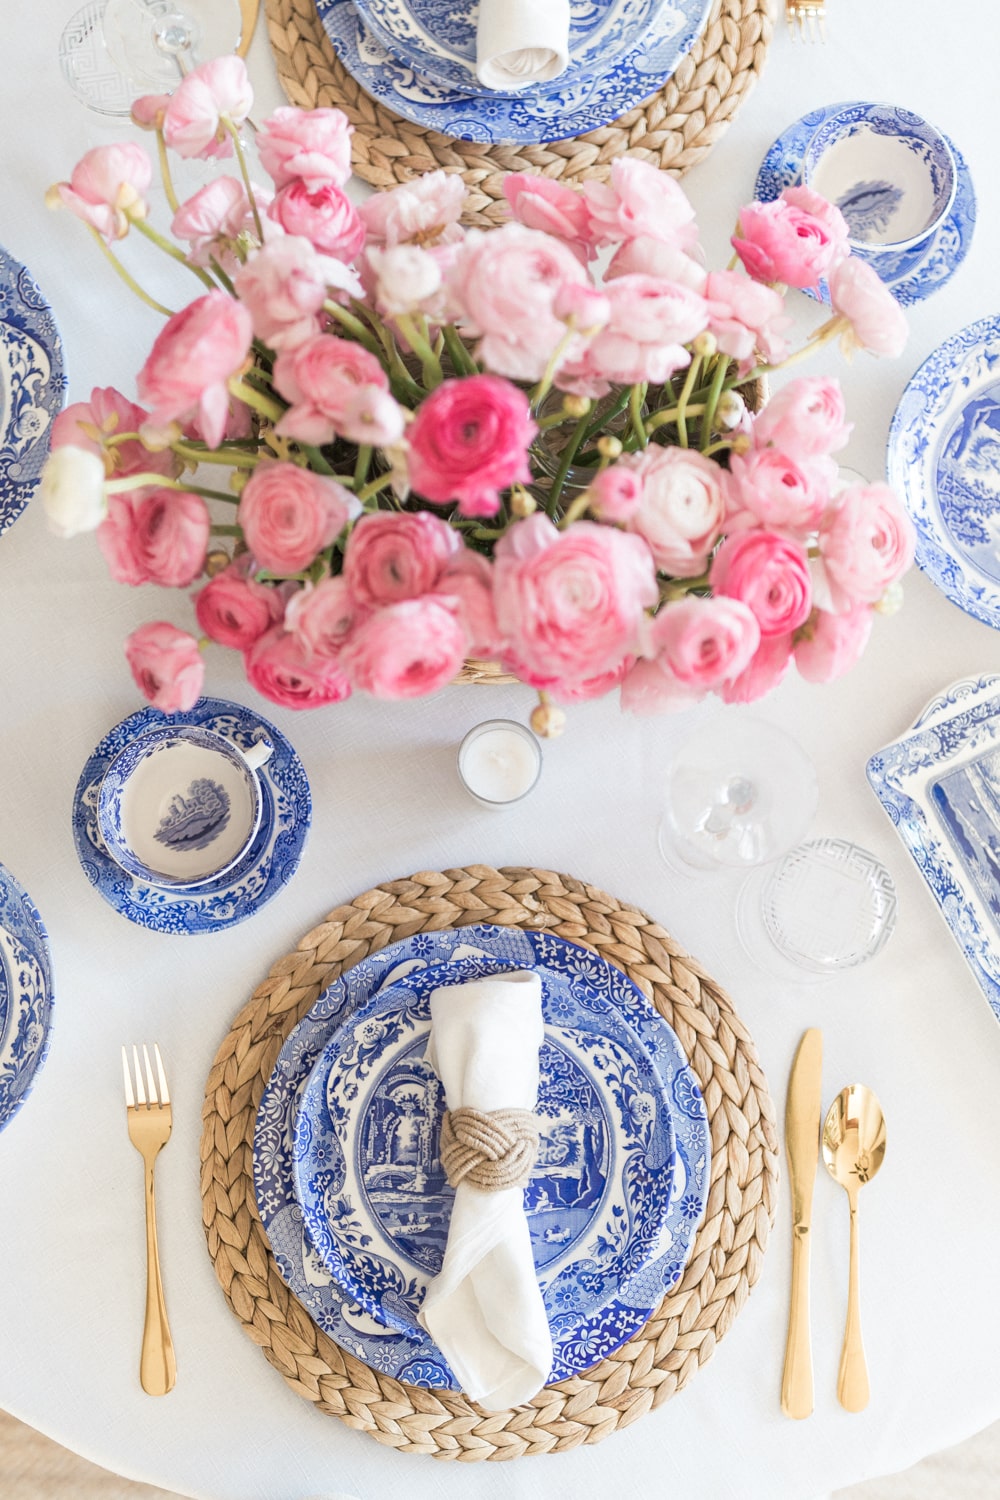 Blue and white romantic table setting for two at home designed by blogger Stephanie Ziajka on Diary of a Debutante